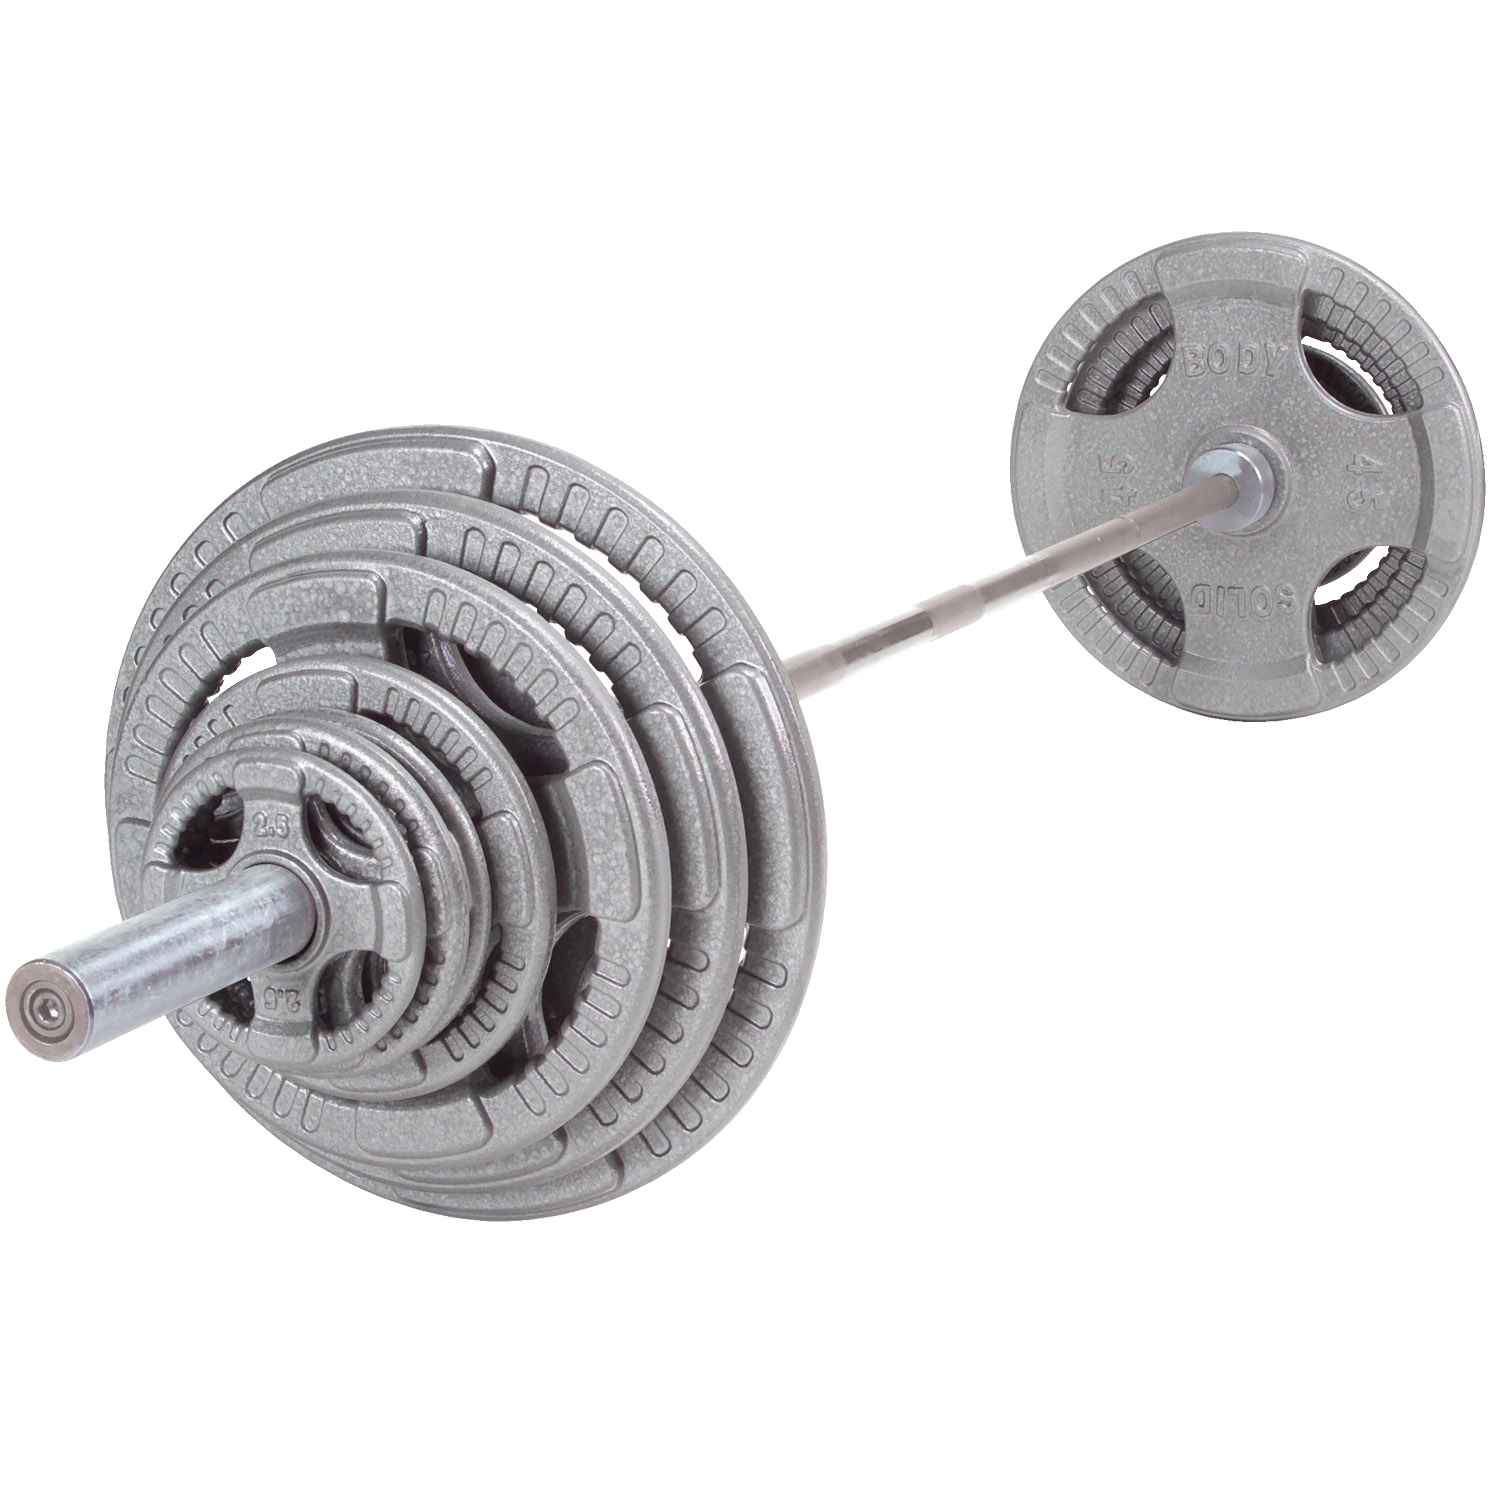 Body-Solid Steel Olympic Grip Plate Set with Bar